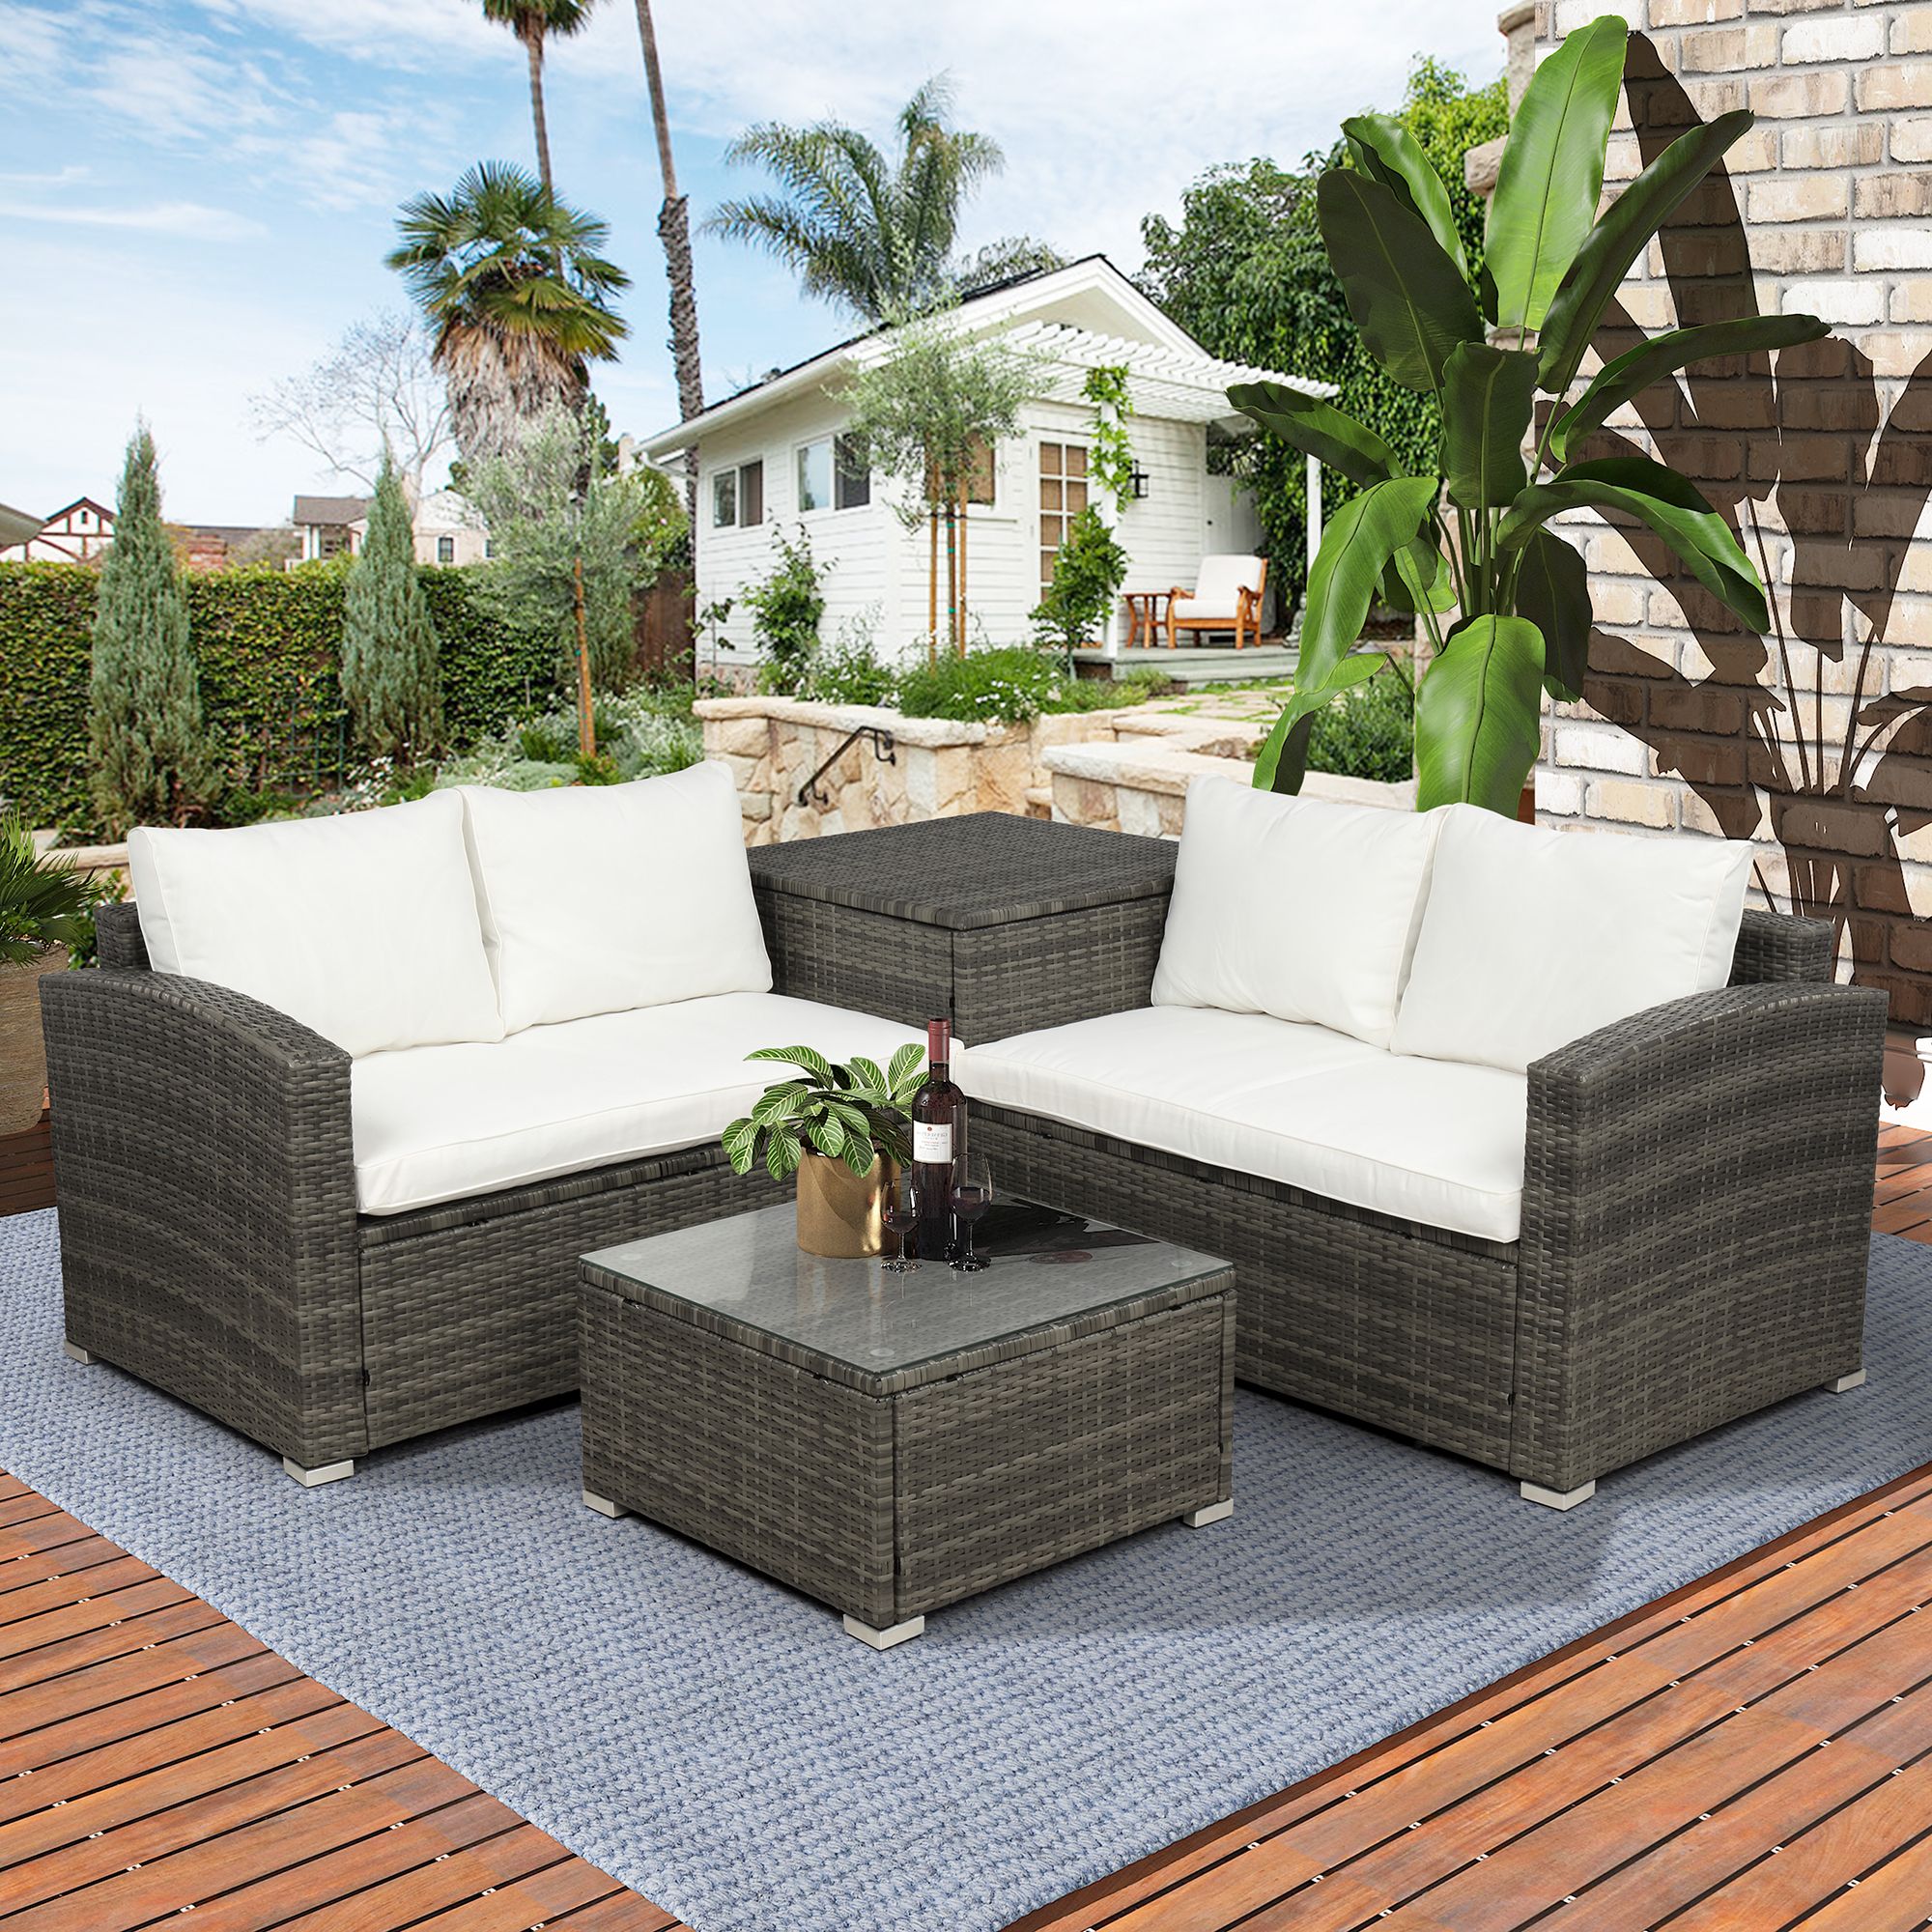 Latest 4 Piece Rattan Patio Furniture Sets, Wicker Bistro Patio Set With Inside 4 Piece Gray Outdoor Patio Seating Sets (View 5 of 15)